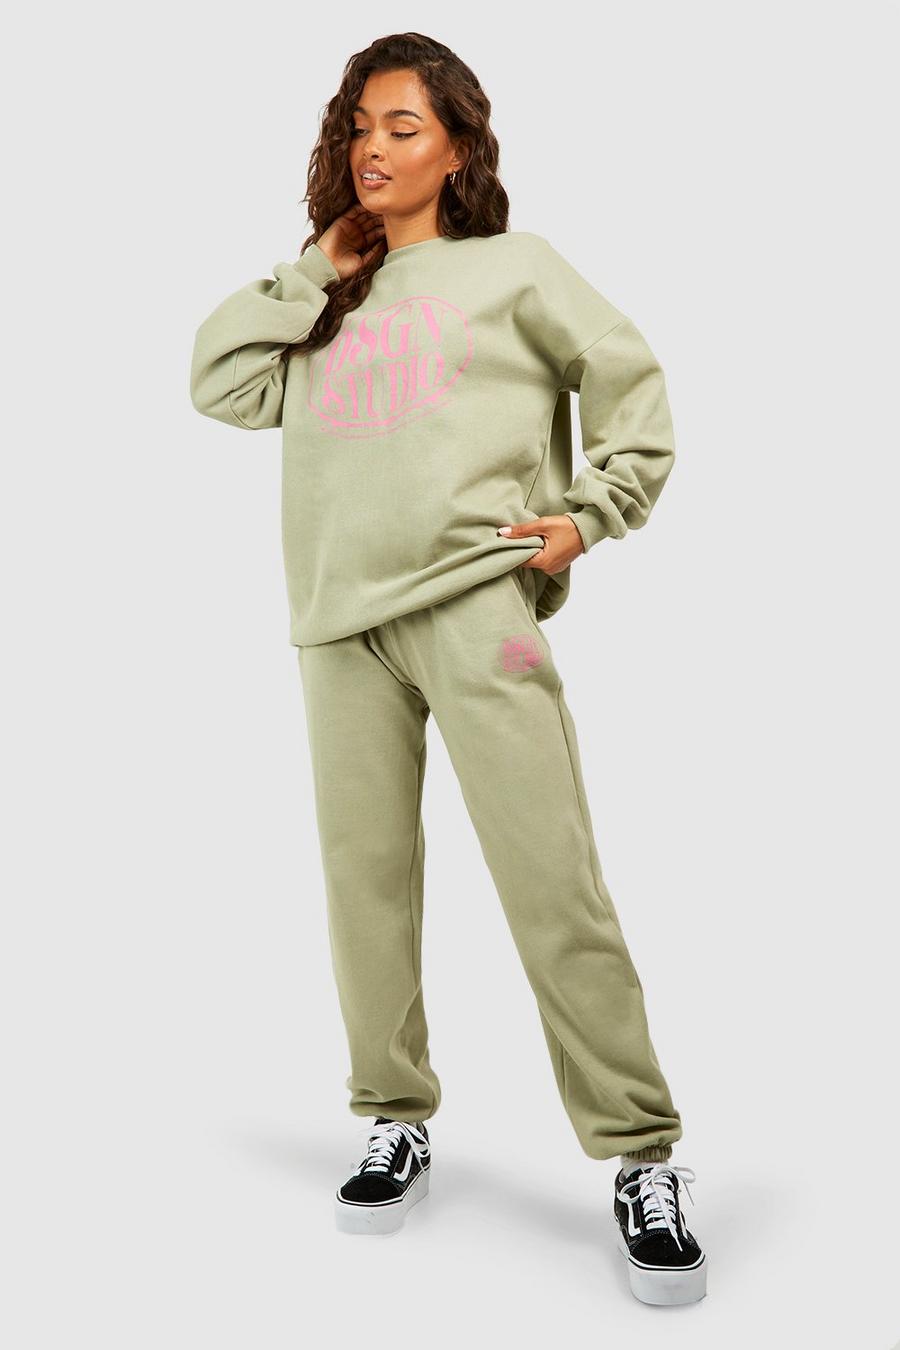 Womens Oversized Green Hoodie Women And Pants Tracksuit Set For